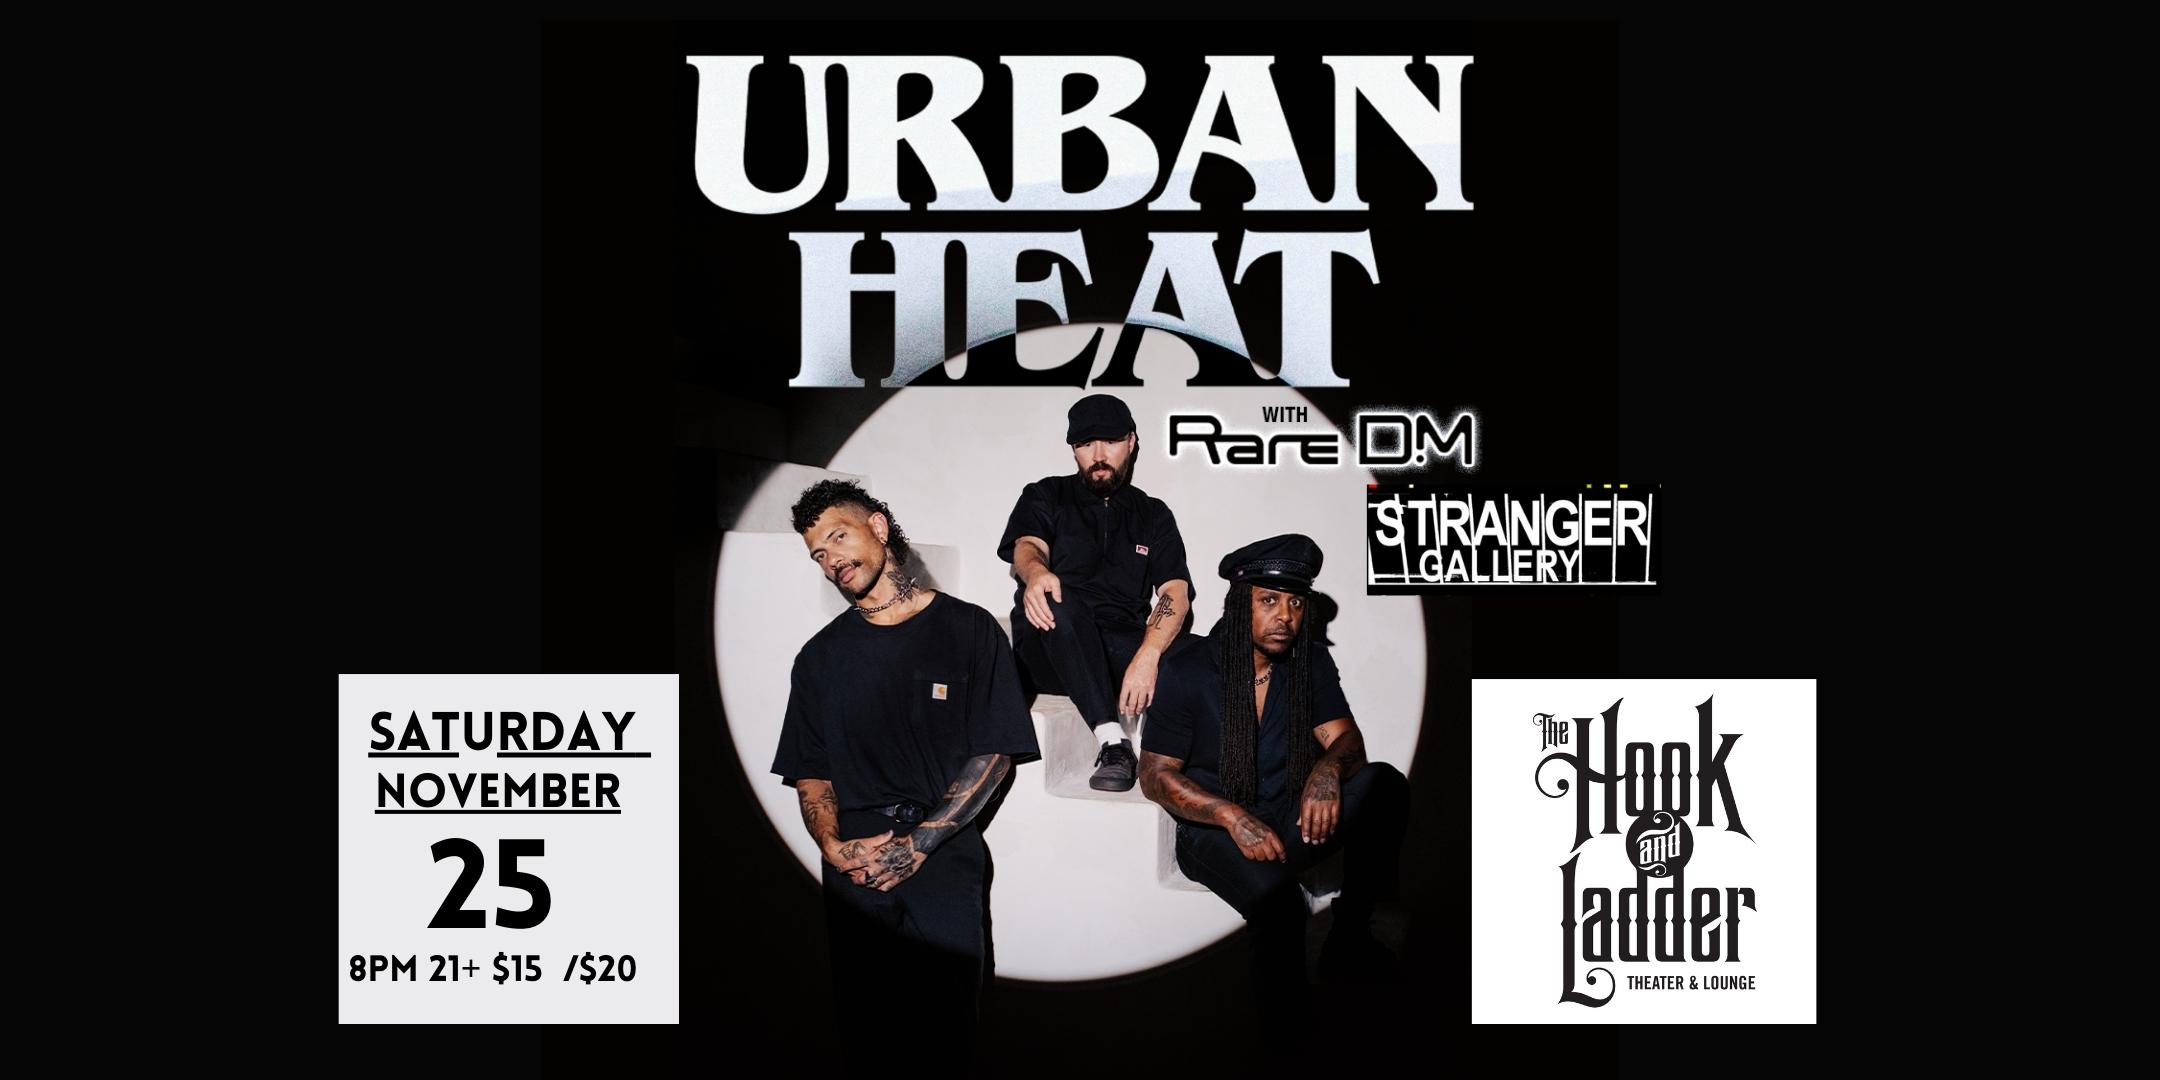 Urban Heat Rare DM Stranger Gallery Saturday, November 25 The Hook and Ladder Theater Doors 8:00pm :: Music 8:30pm :: 21+ $15 ADV / $20 DOS Tickets On Sale Now